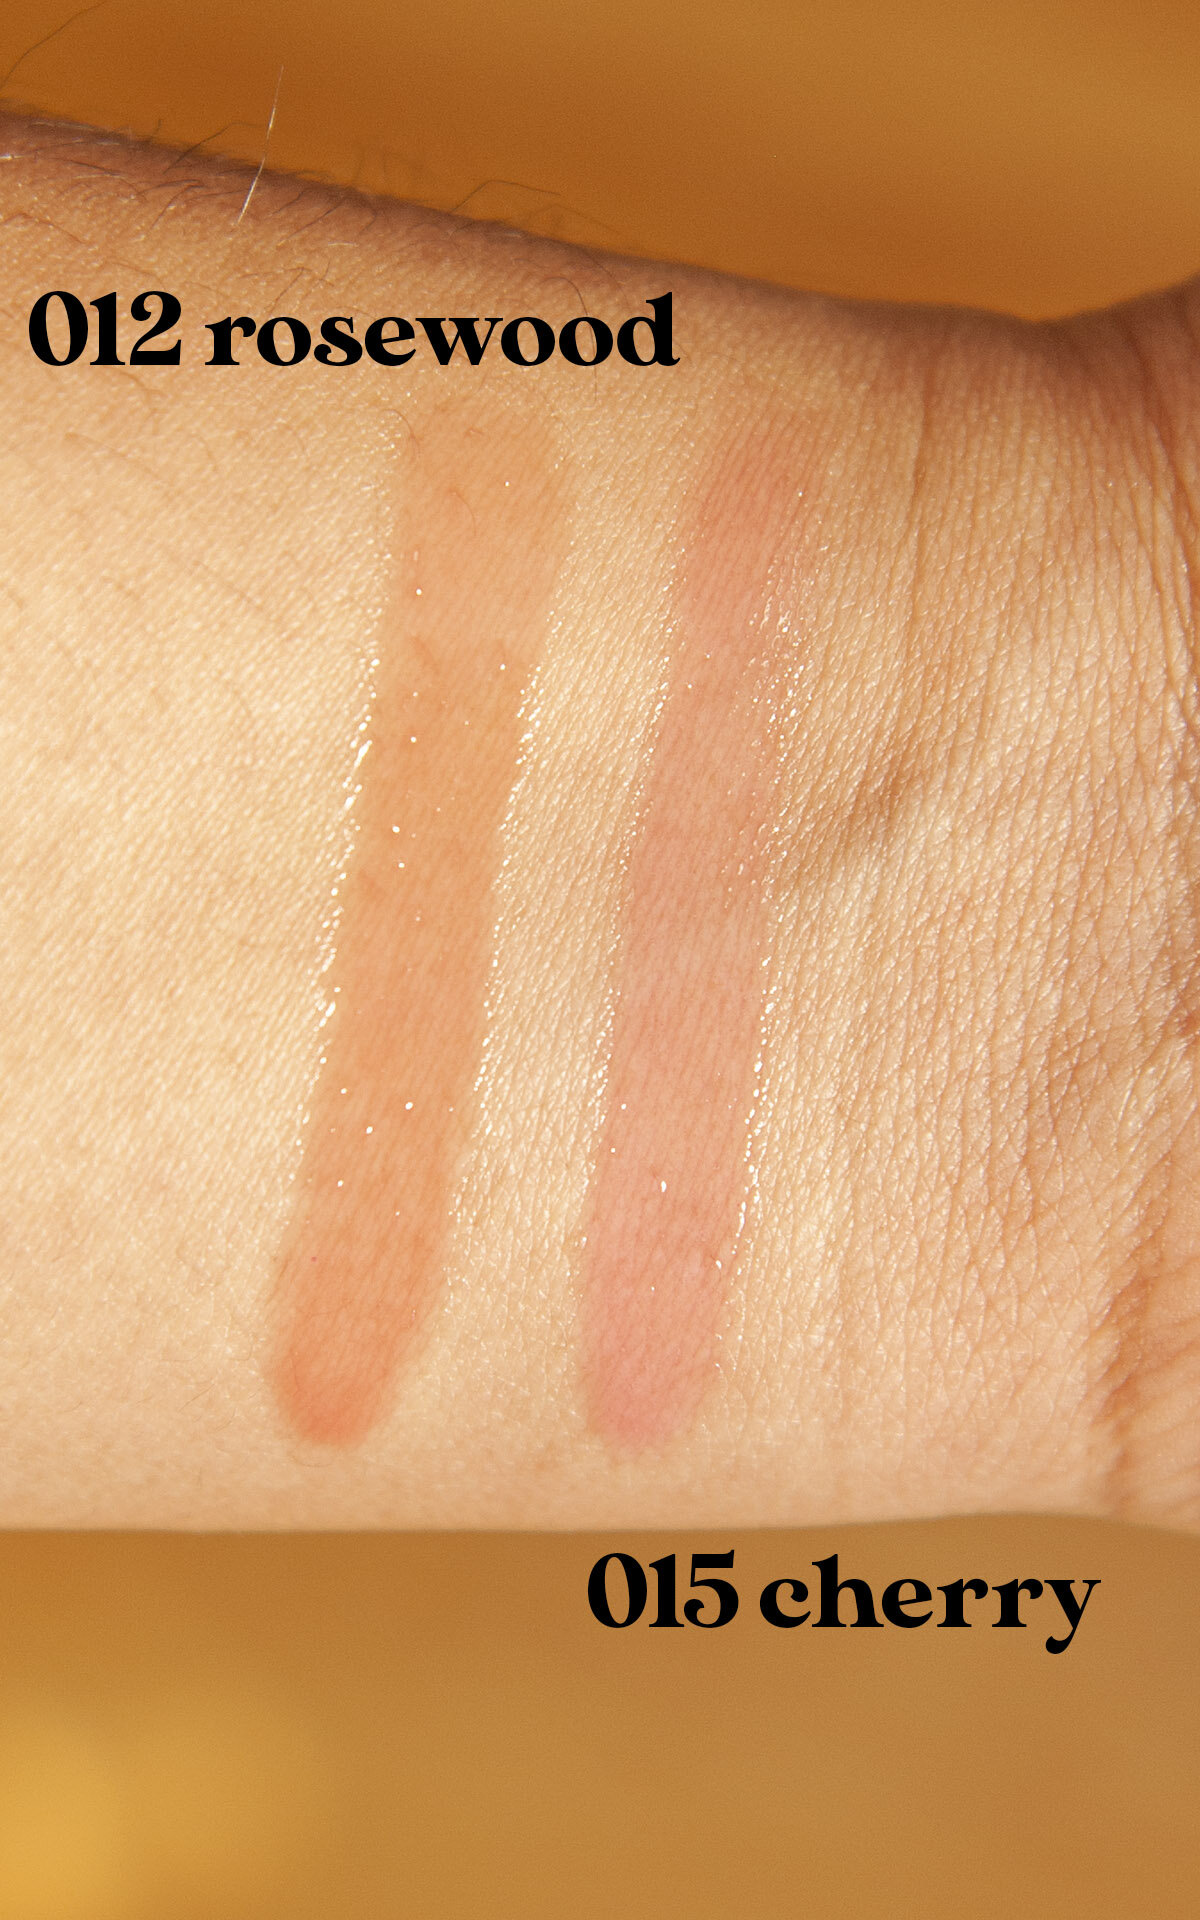 dior lip glow oil swatches rosewood cherry.jpg